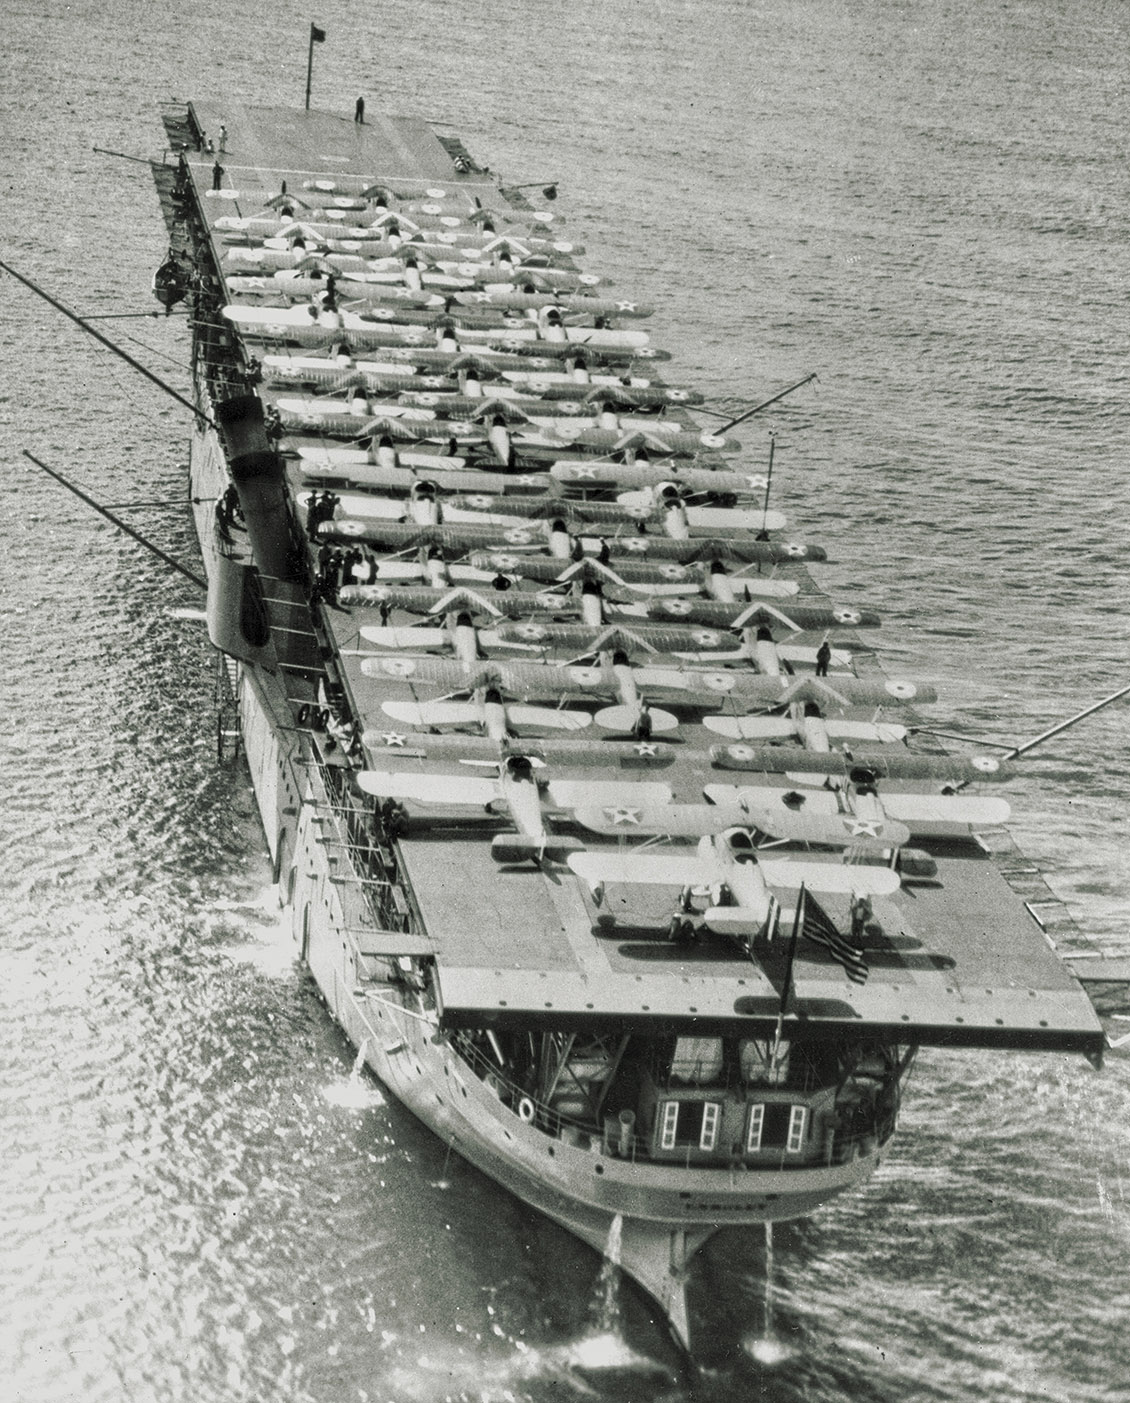 USS Langley (CV 1) in Pearl Harbor with 34 planes on her flight deck, May 1928.